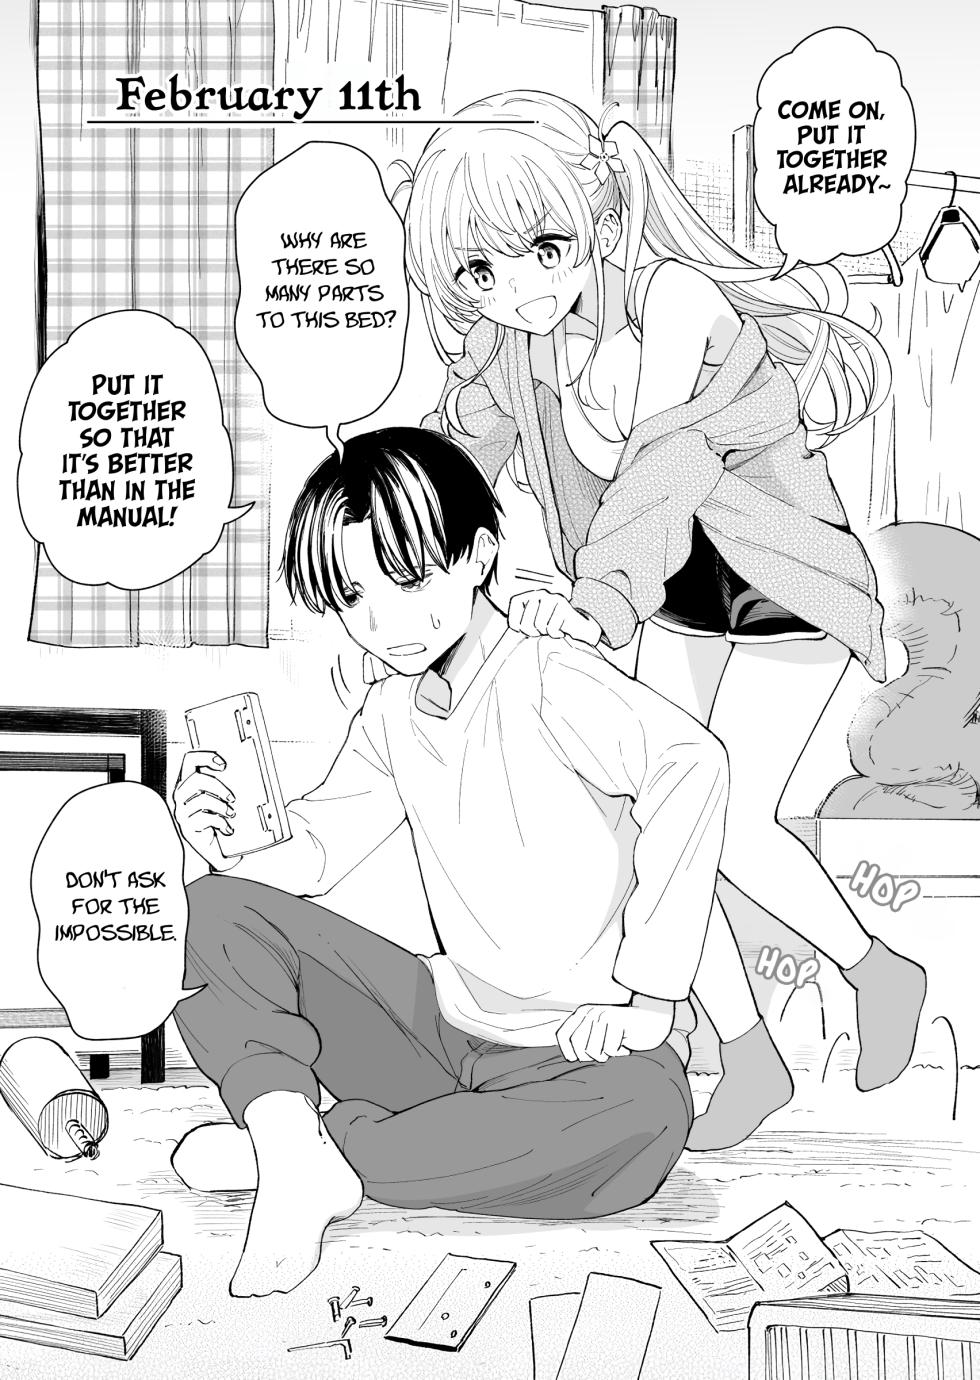 [Hiro no Ke (Hiro Hirono)] Sasete Kureru 3 no Gimai | A Younger Stepsister Who Only Has Sex With Me on Days That are Divisible by 3 or on Days That Include The Number 3. [English] [HeatManga] - Page 13